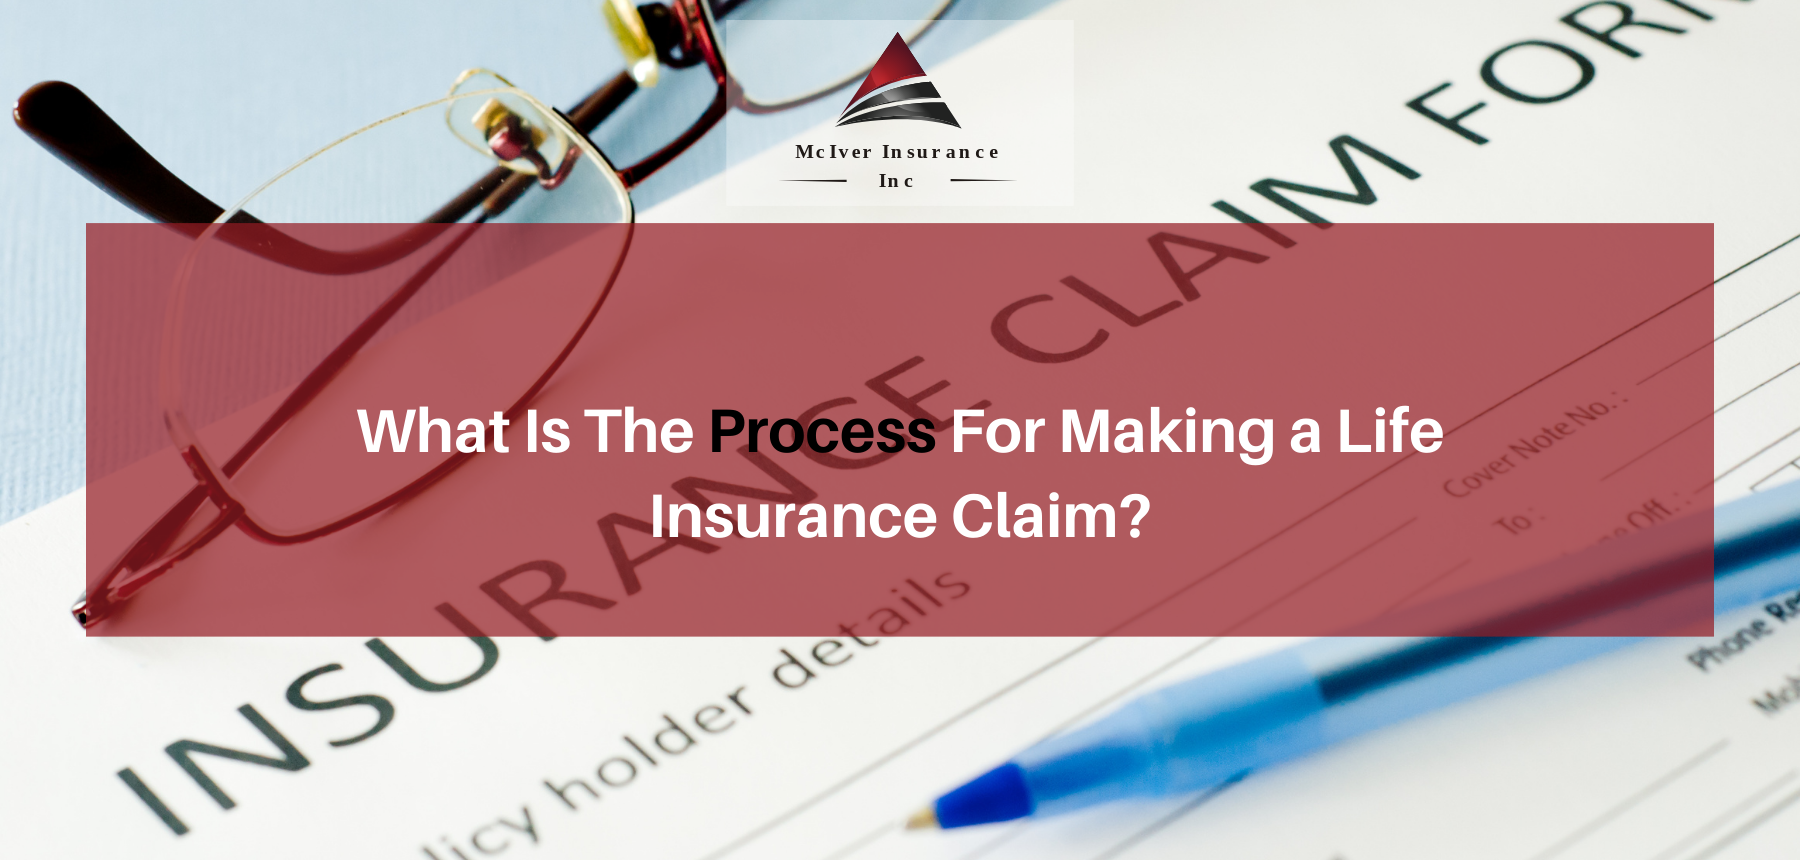 What Is The Process For Making a Life Insurance claim